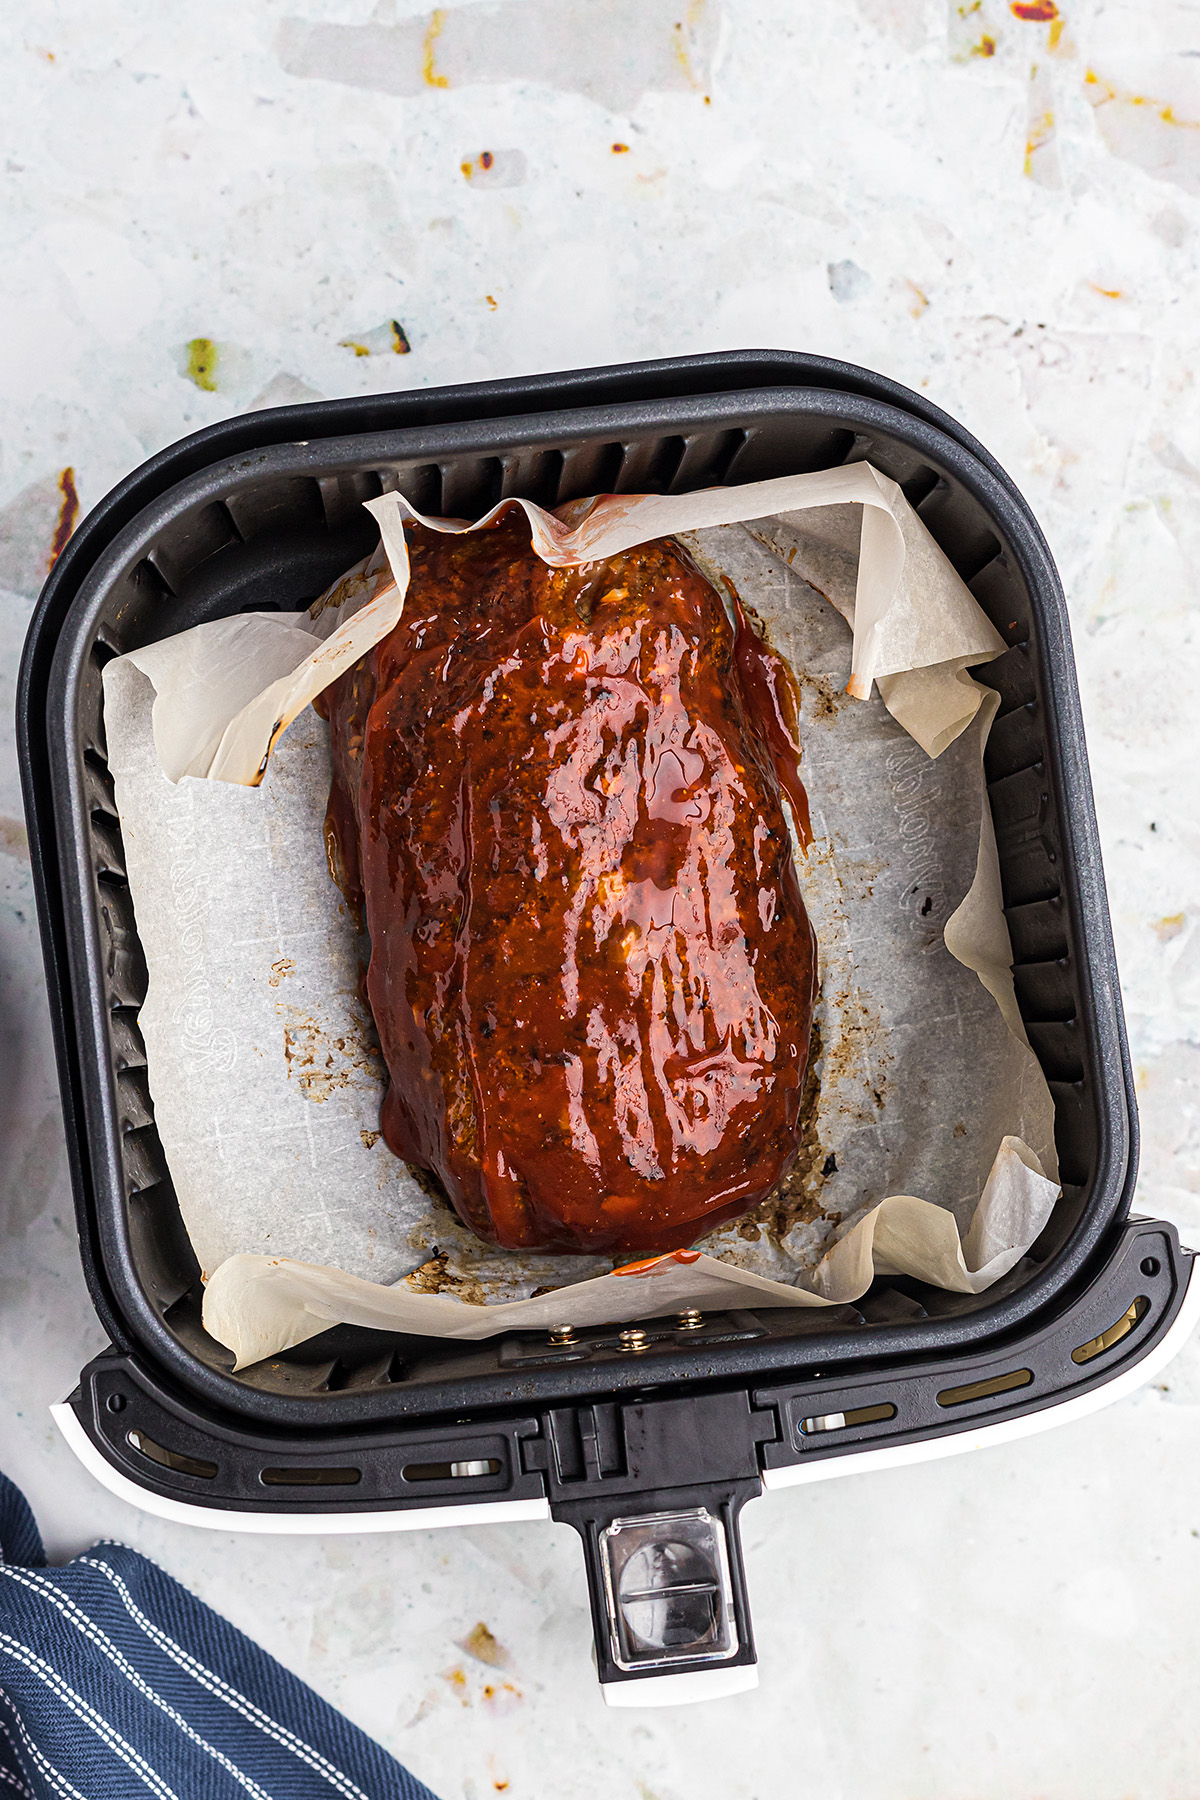 Overhead view of a glazed meatloaf in an air fryer basket.